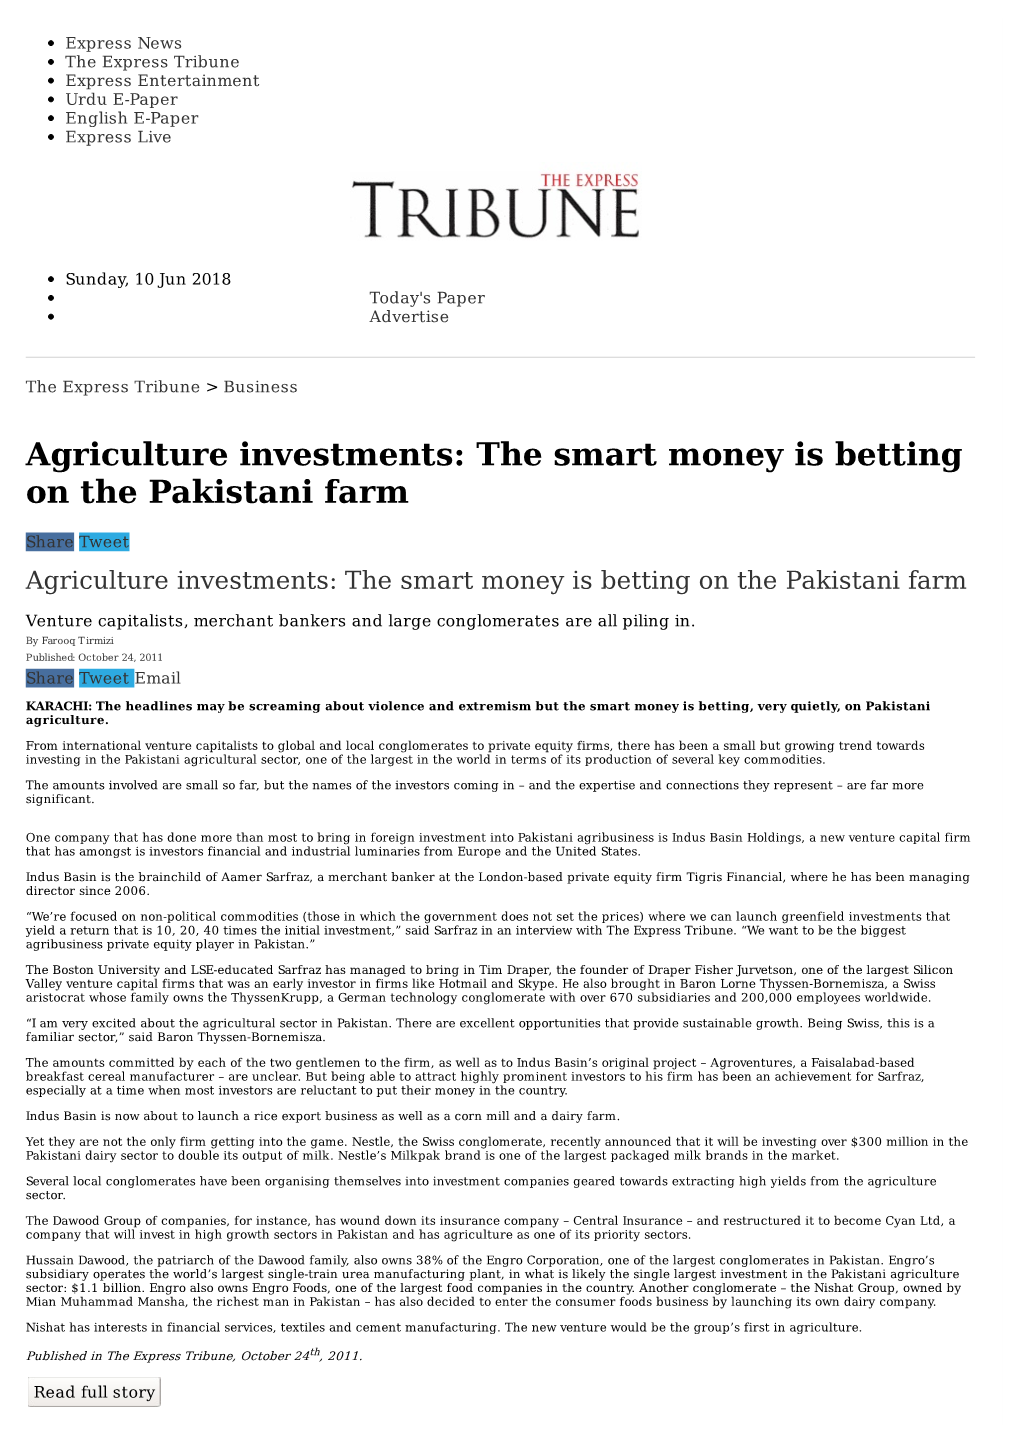 Agriculture Investments: the Smart Money Is Betting on the Pakistani Farm